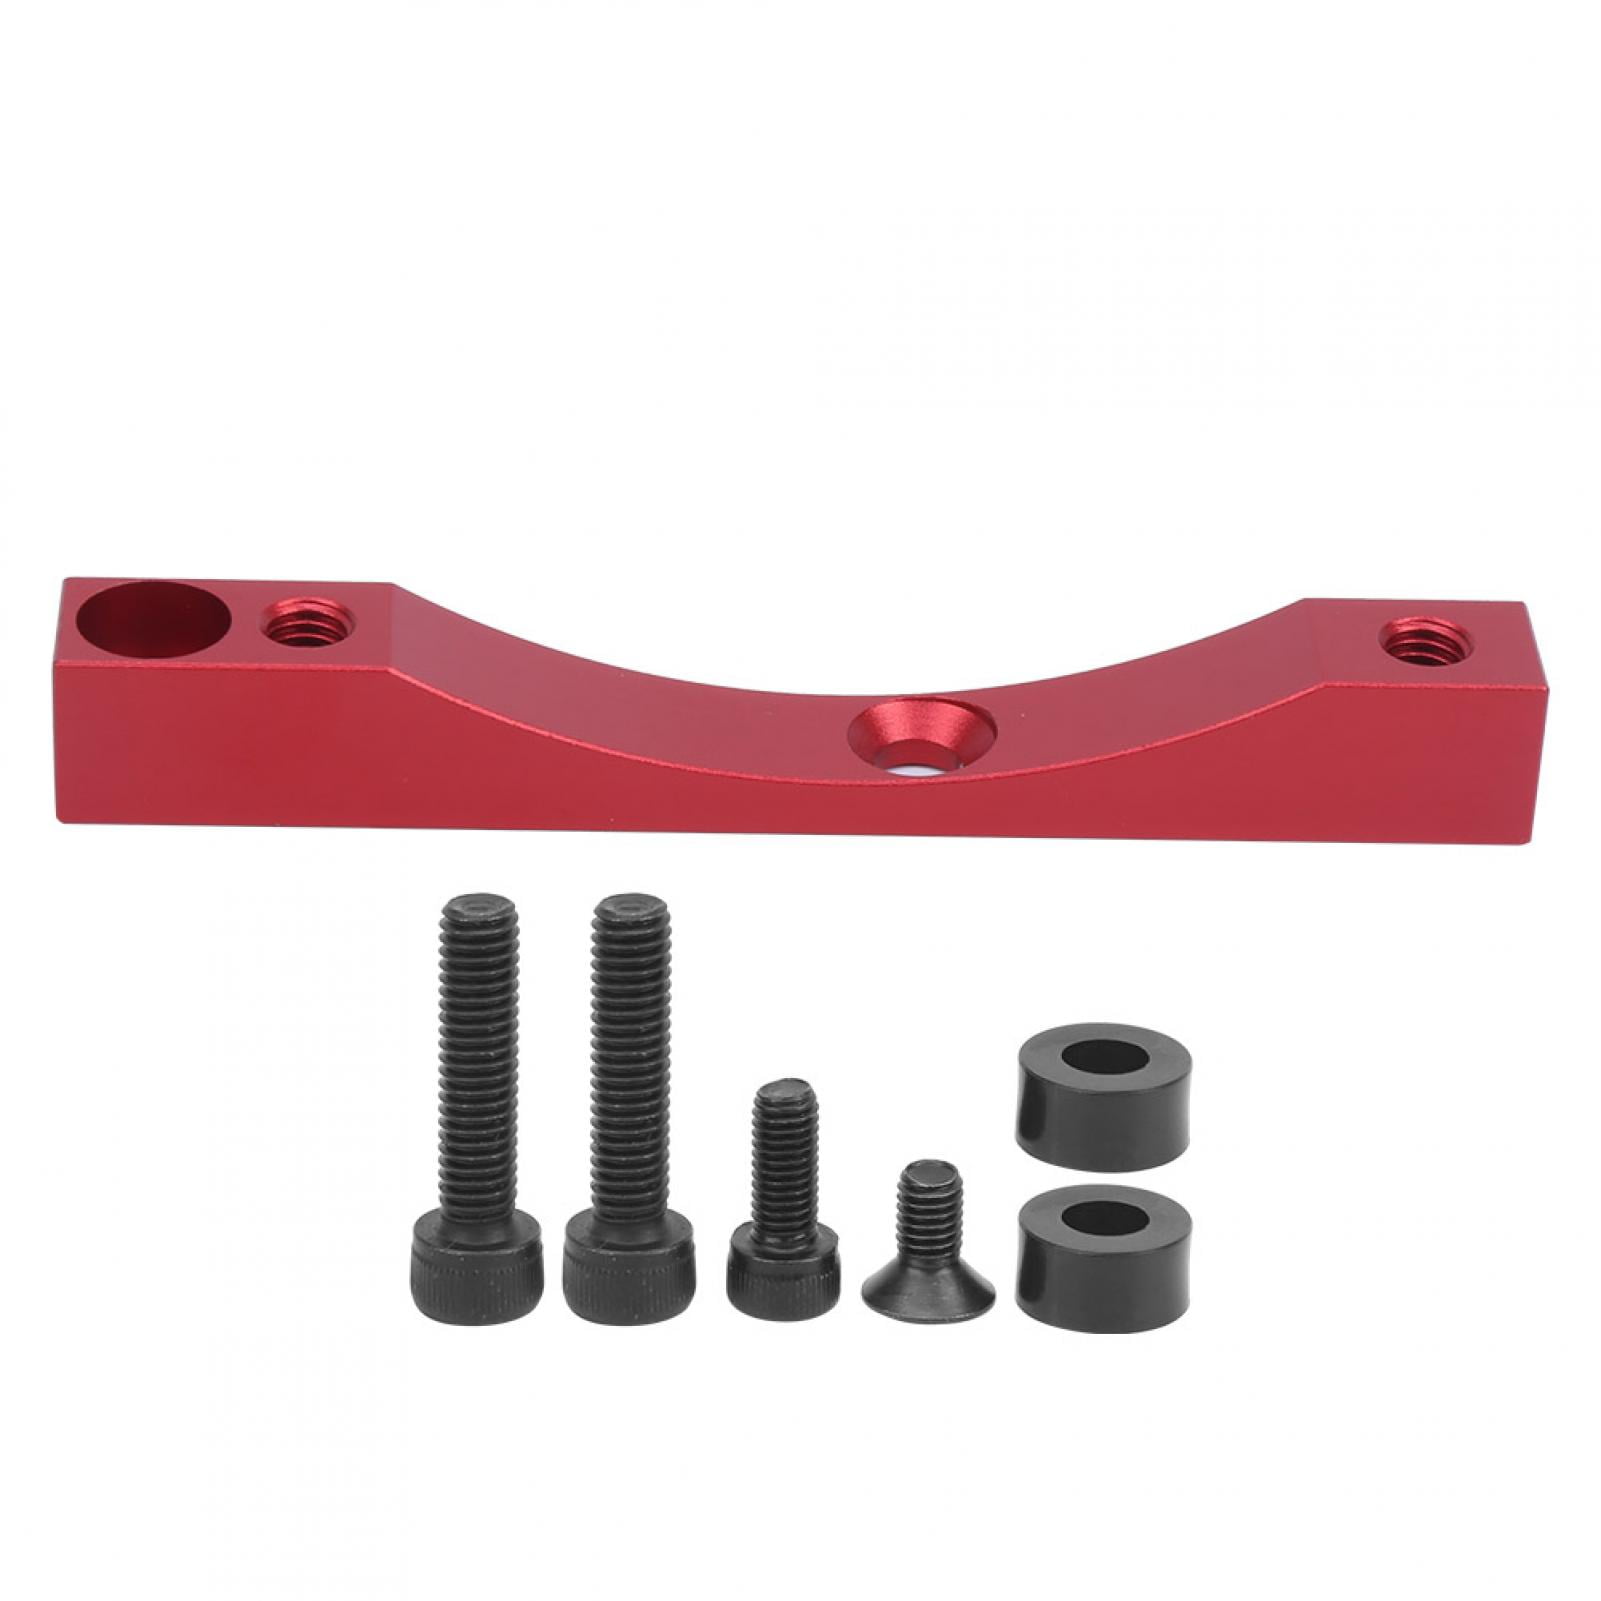 Details about   Oil Brake Adapter High‑quality Oil Brake Base Scooter Accessory For XTECH ZOOM